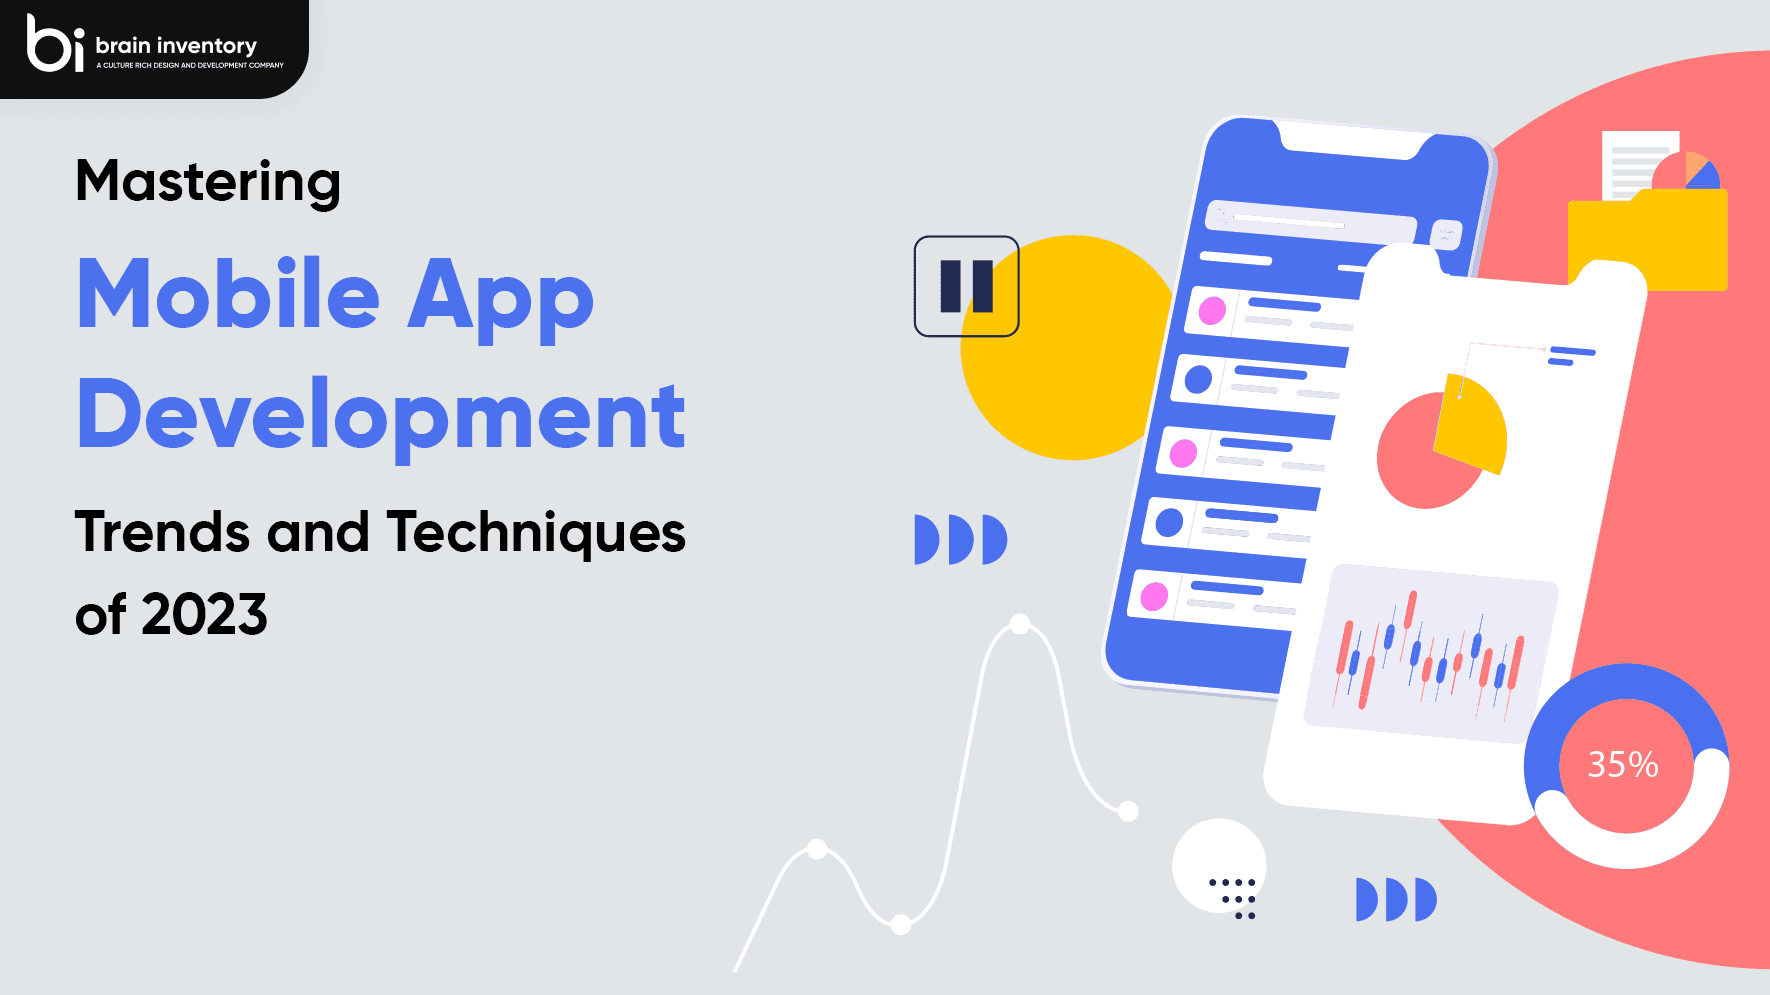 Mastering Mobile App Development Trends and Techniques of 2023